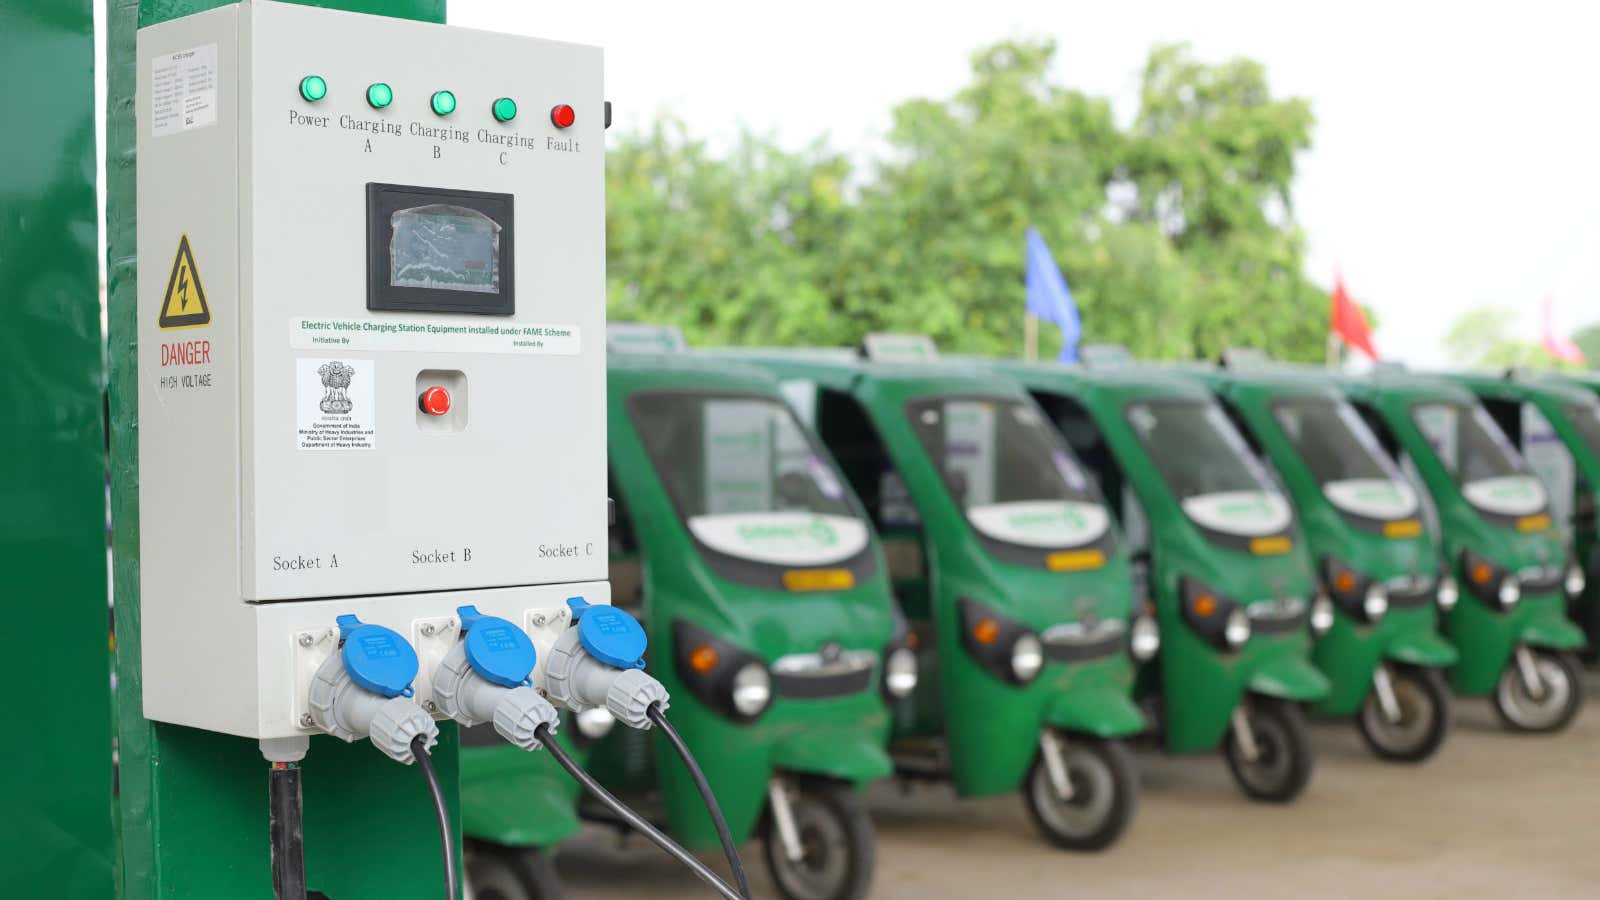 SmartE is solving Delhi's pollution problems with electric vehicles